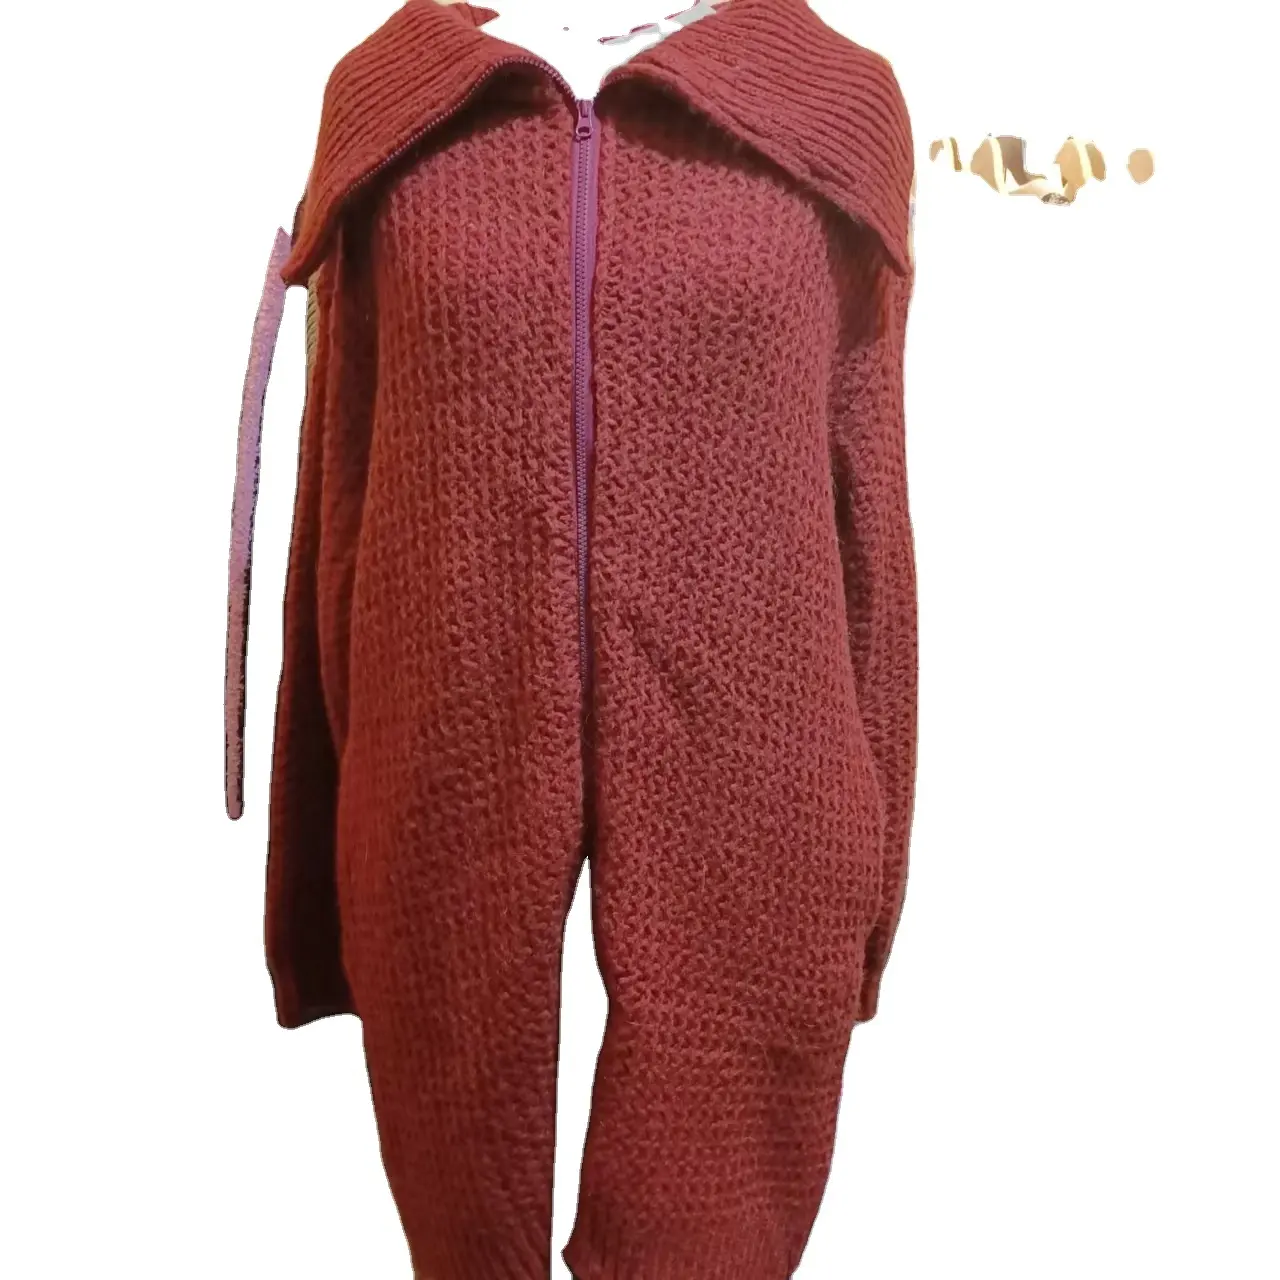 Manufacturer low price Large Size red solid color long women's sweater dress Mid-Length knitted Cardigan zipper Sweater Coat